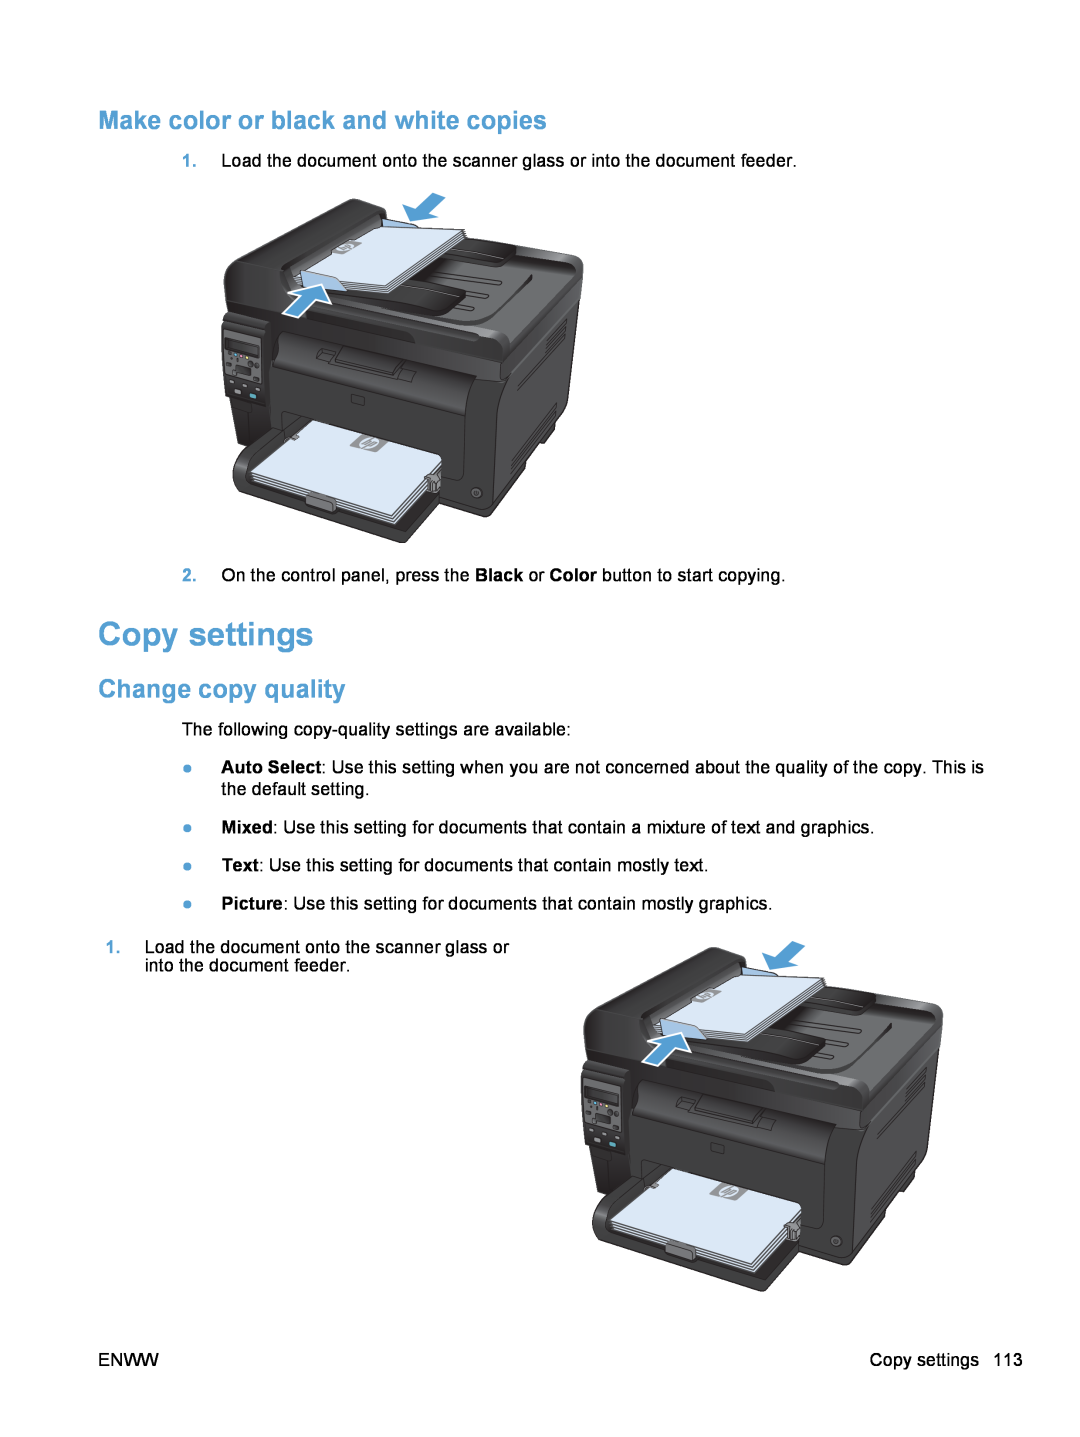 HP 100 COLOR MFP M175, 100 COLOR CE866ABGJ manual Copy settings, Make color or black and white copies, Change copy quality 